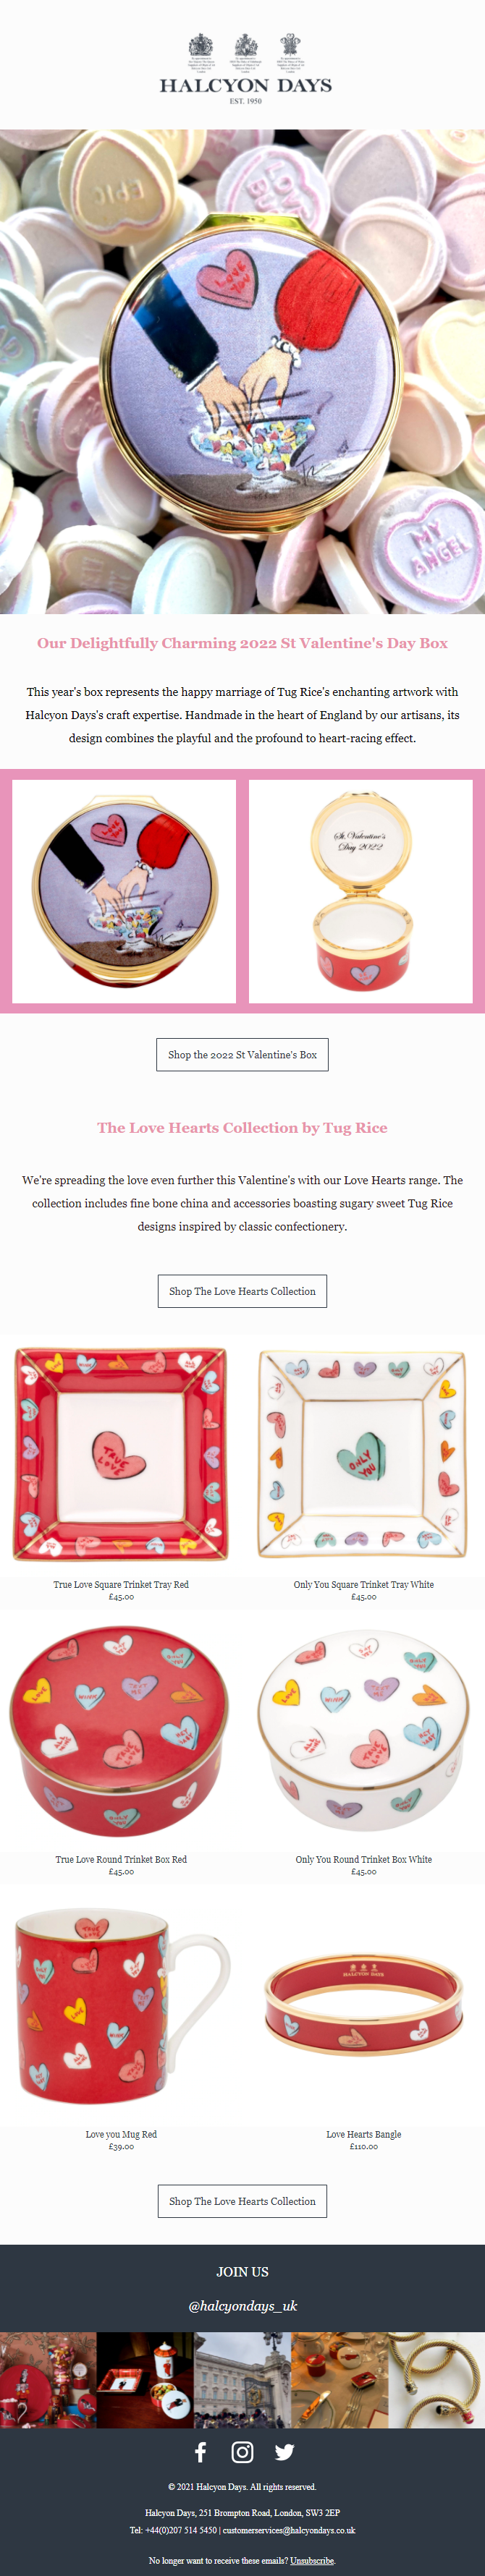 Halcyon V-Day email